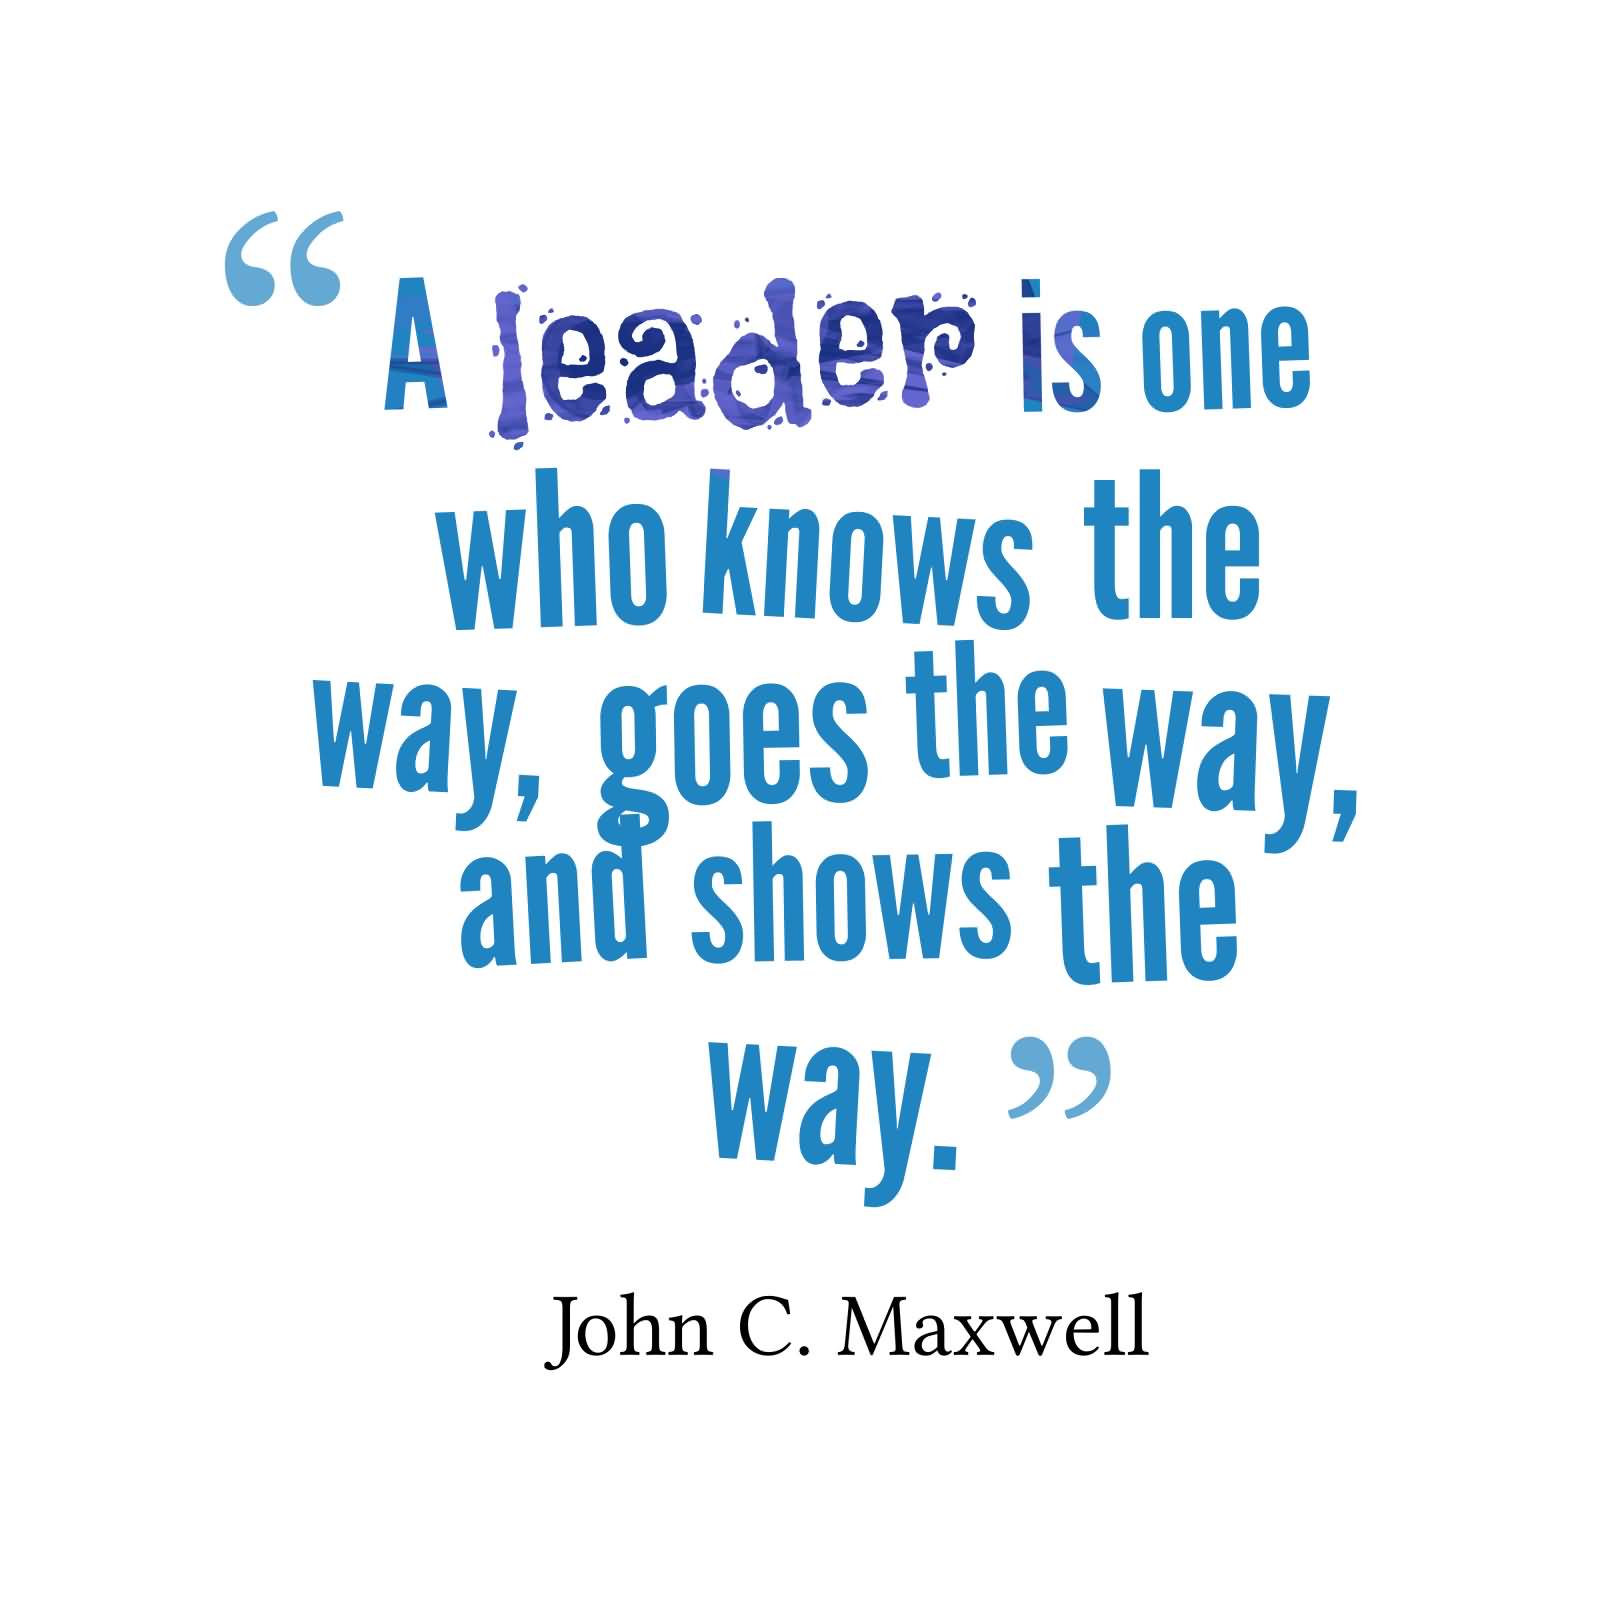 A leader is one who knows the way, goes the way, and shows the way. John C. Maxwell (2)